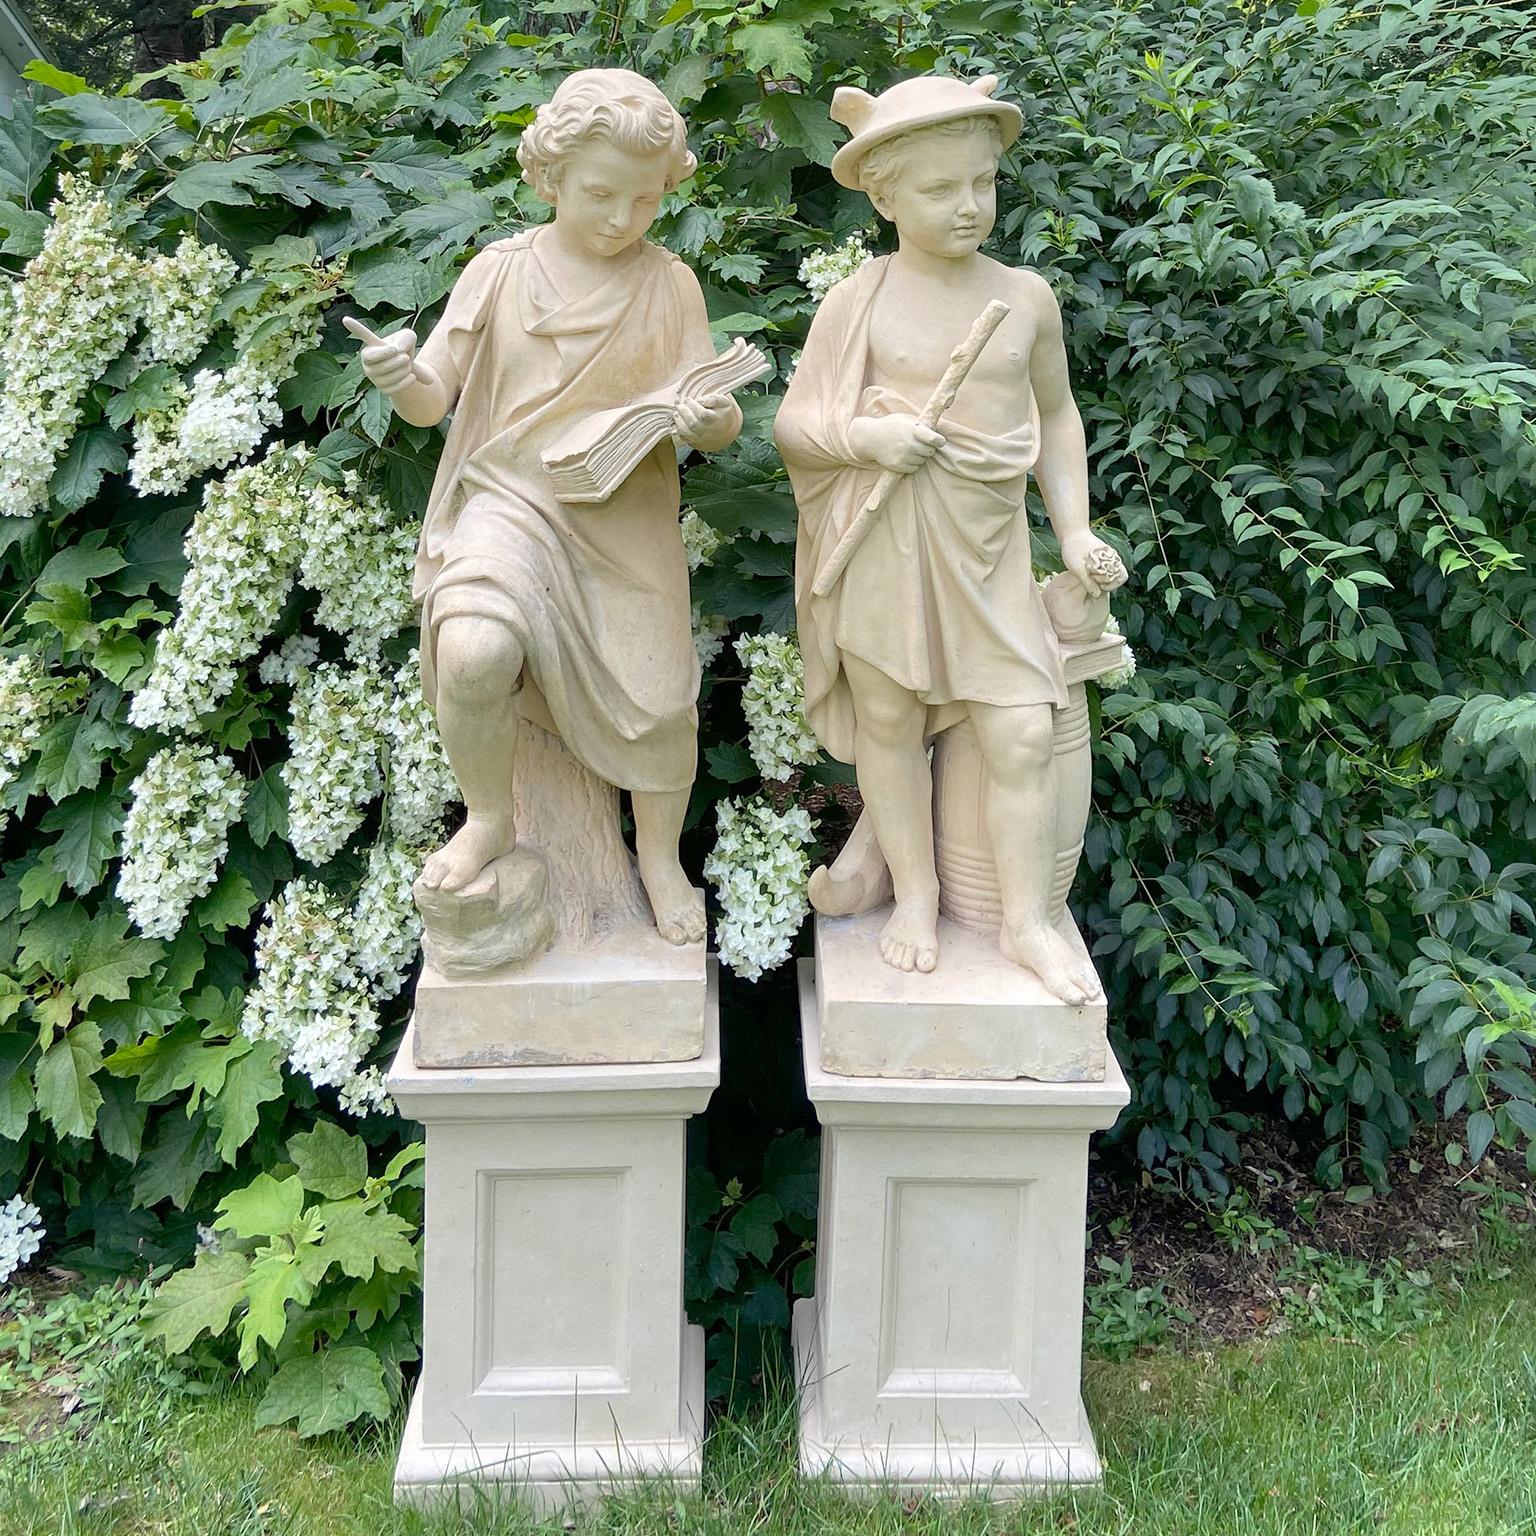 A fine and rare pair of stoneware figures representing Commerce and Knowledge, possibly produced by Doulton & Co. of Lambeth, England, the figure of Knowledge depicted as a youth, classically robed and seated on a tree trunk, with open book in